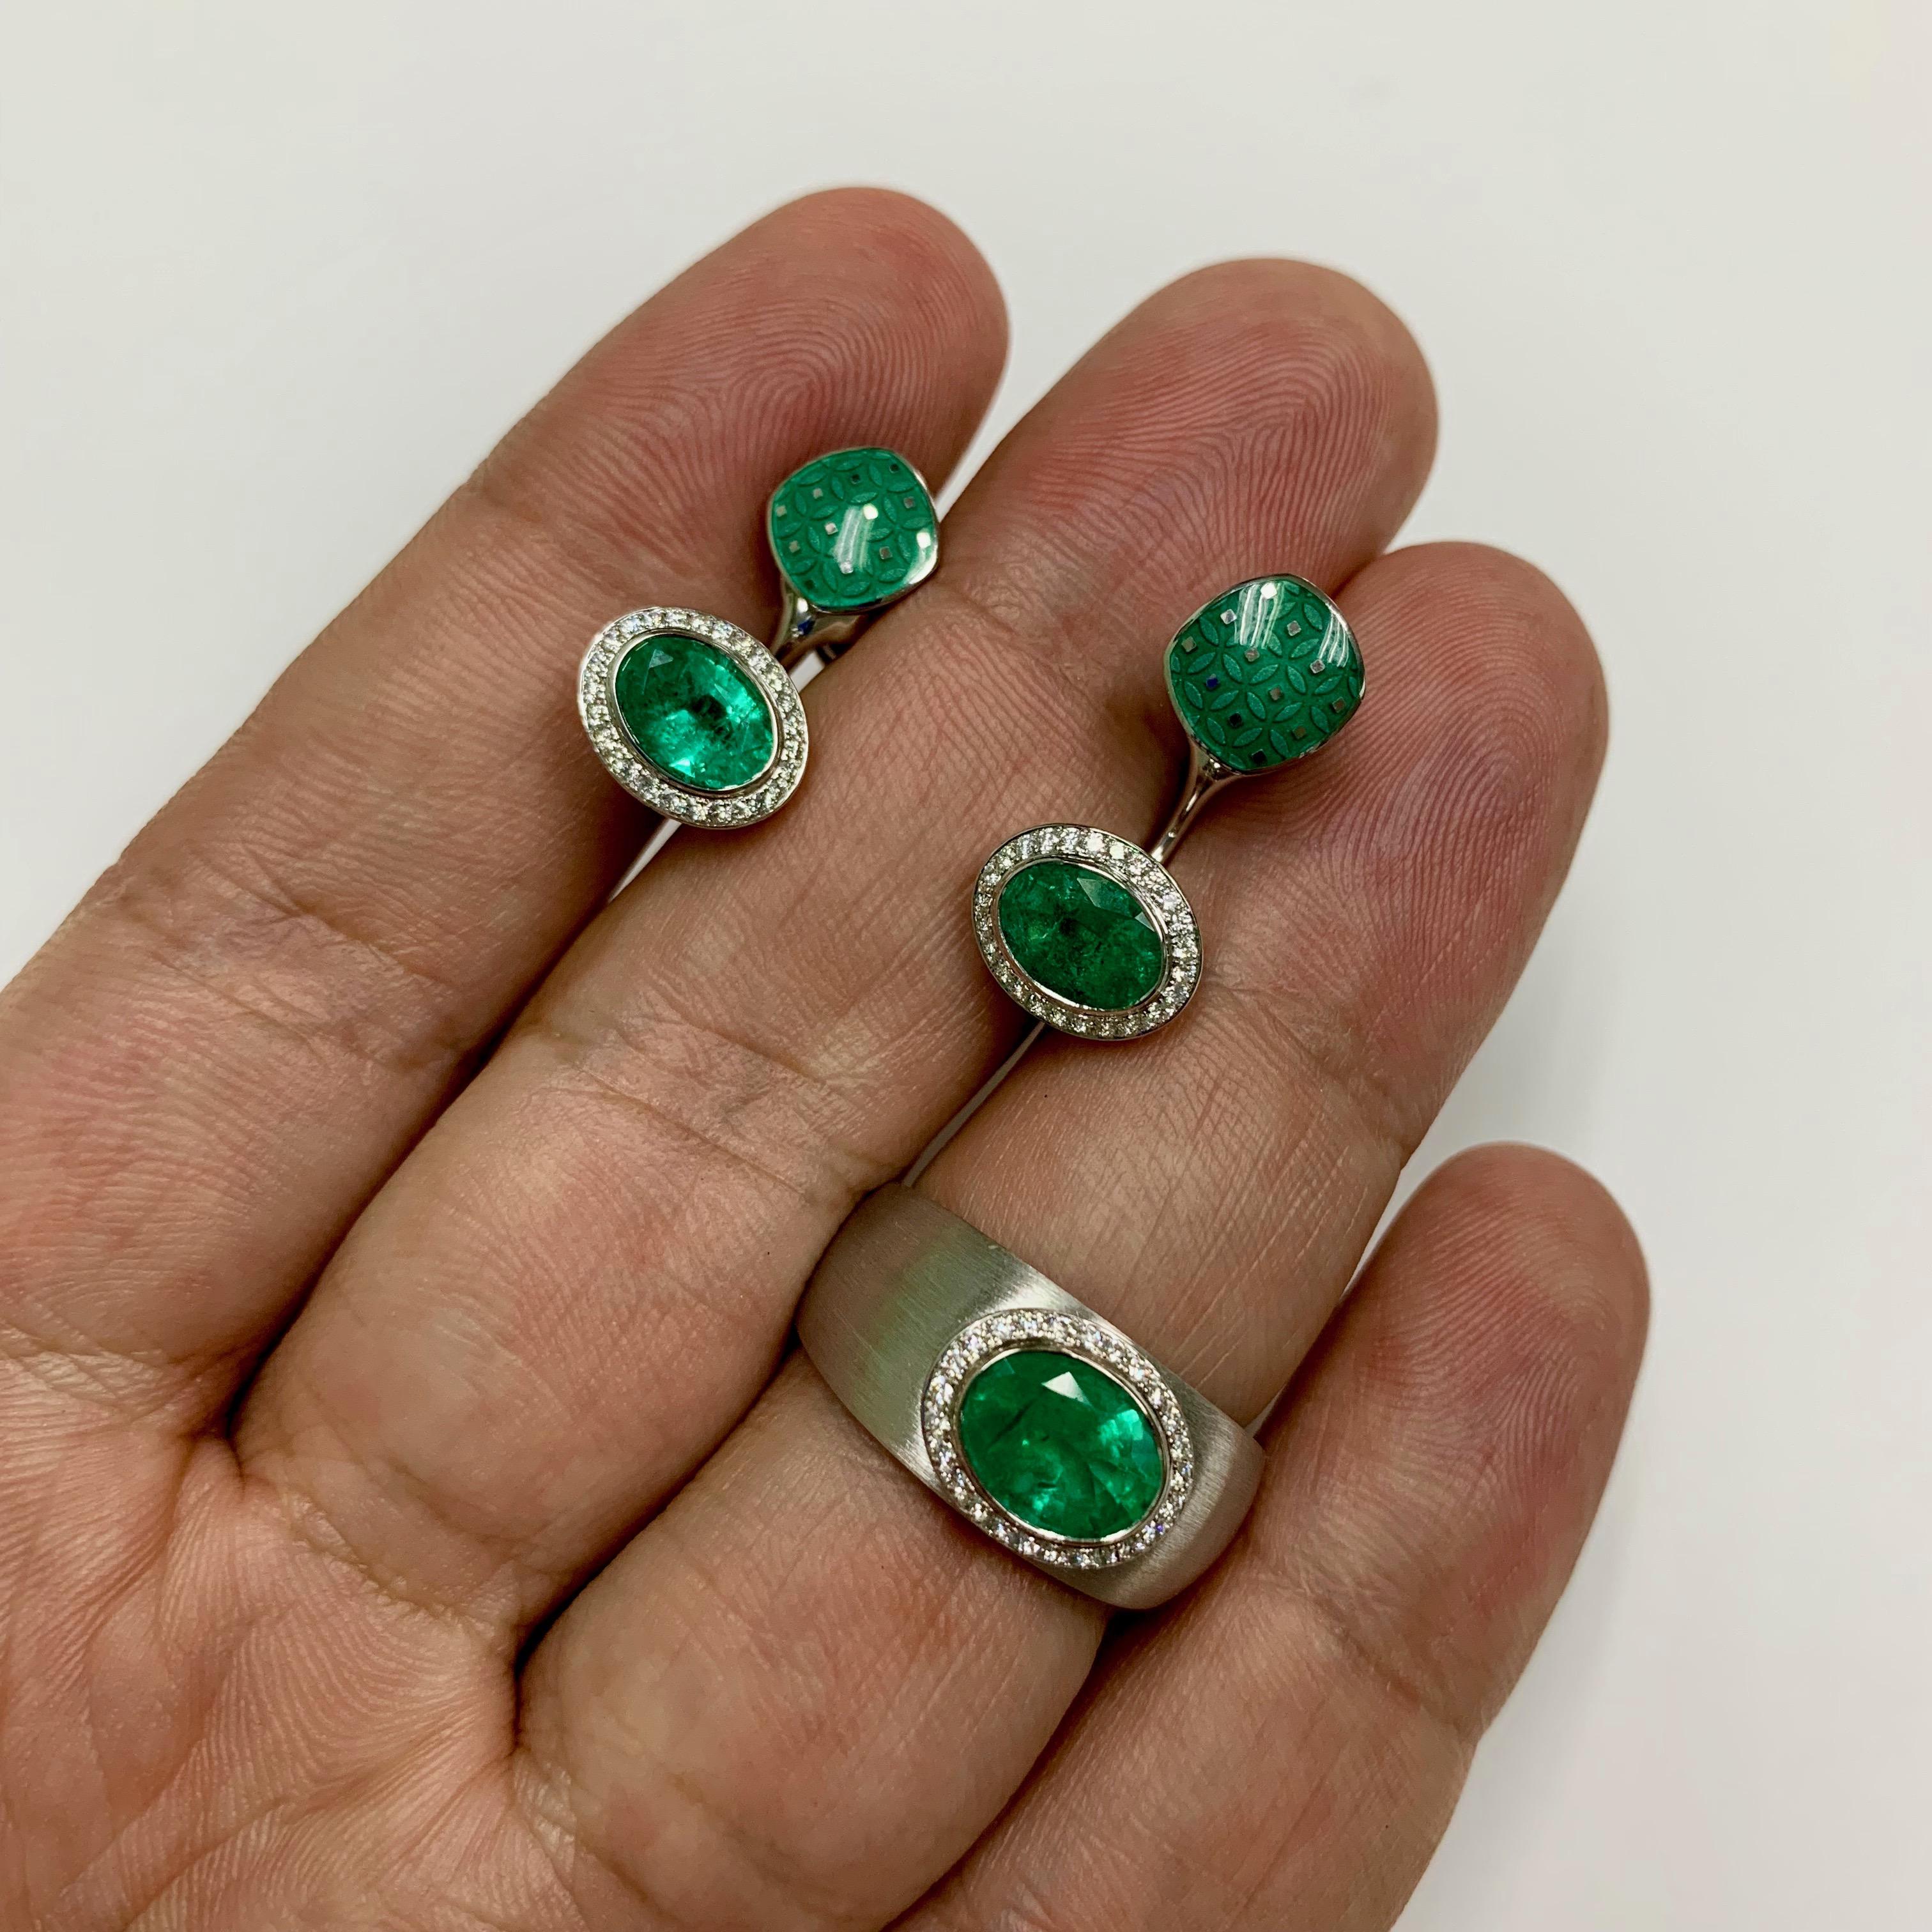 Emerald Diamonds Enamel 18 Karat White Gold Suite
Please take a look at one of our trade mark texture in Kaleidoscope Collection - 